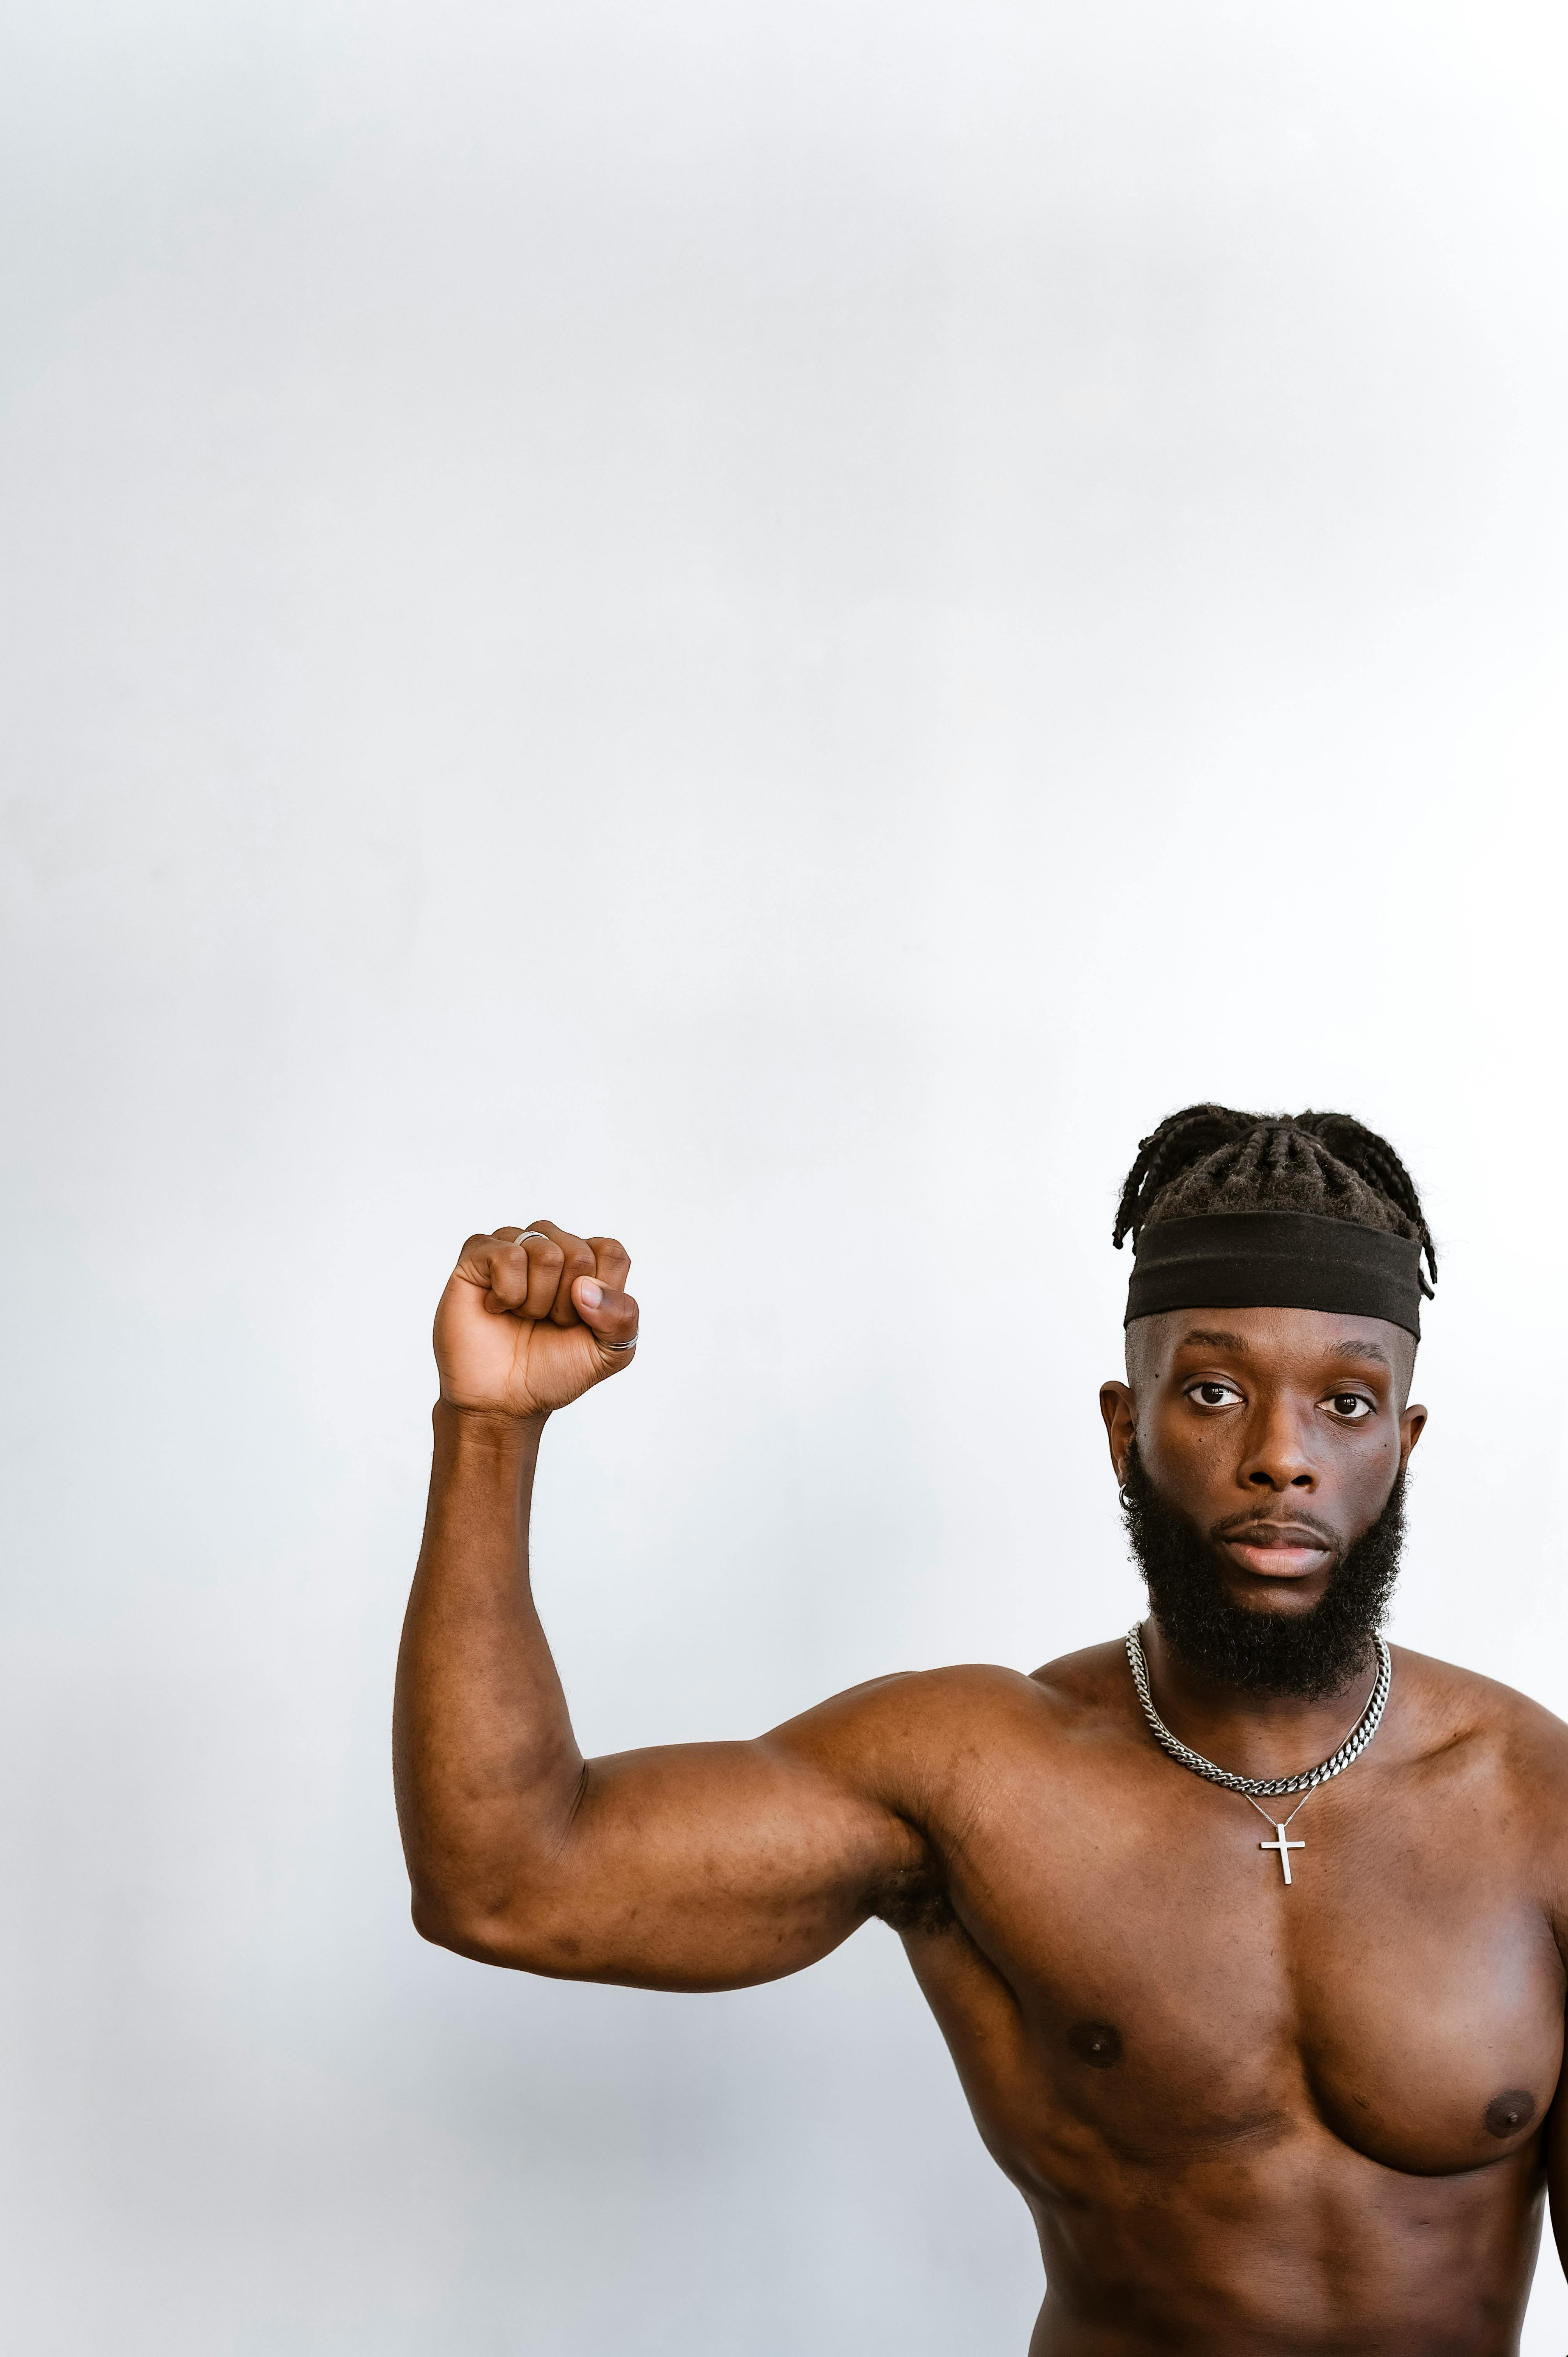 4024px x 6048px - Topless Man with a Clenched Fist Â· Free Stock Photo